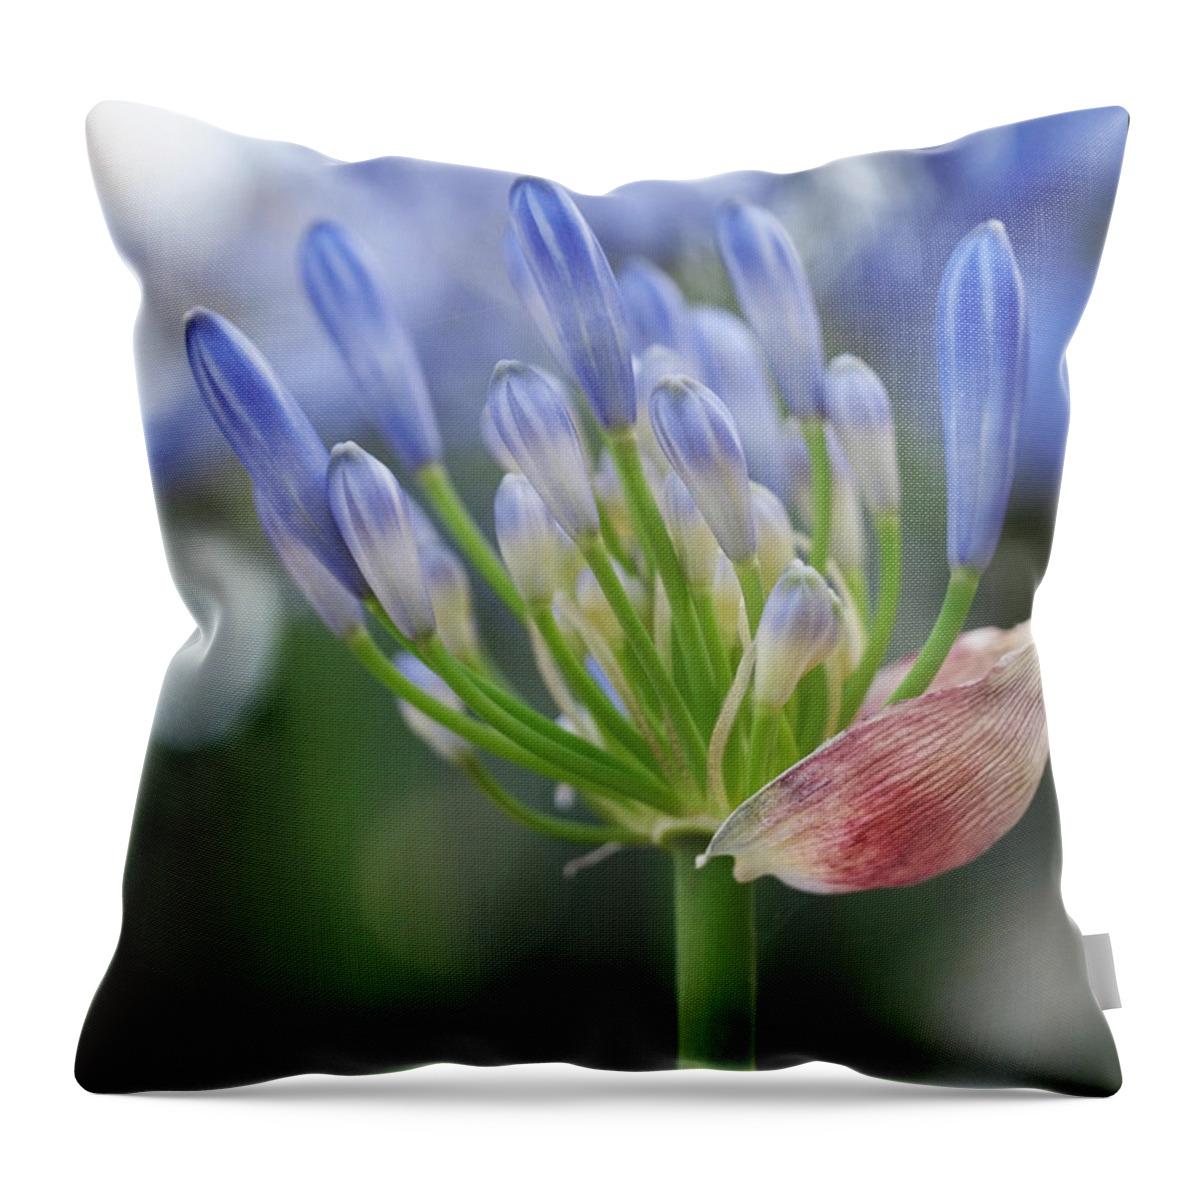 Agapanthus Throw Pillow featuring the photograph Blooming Agapanthus by Rona Black